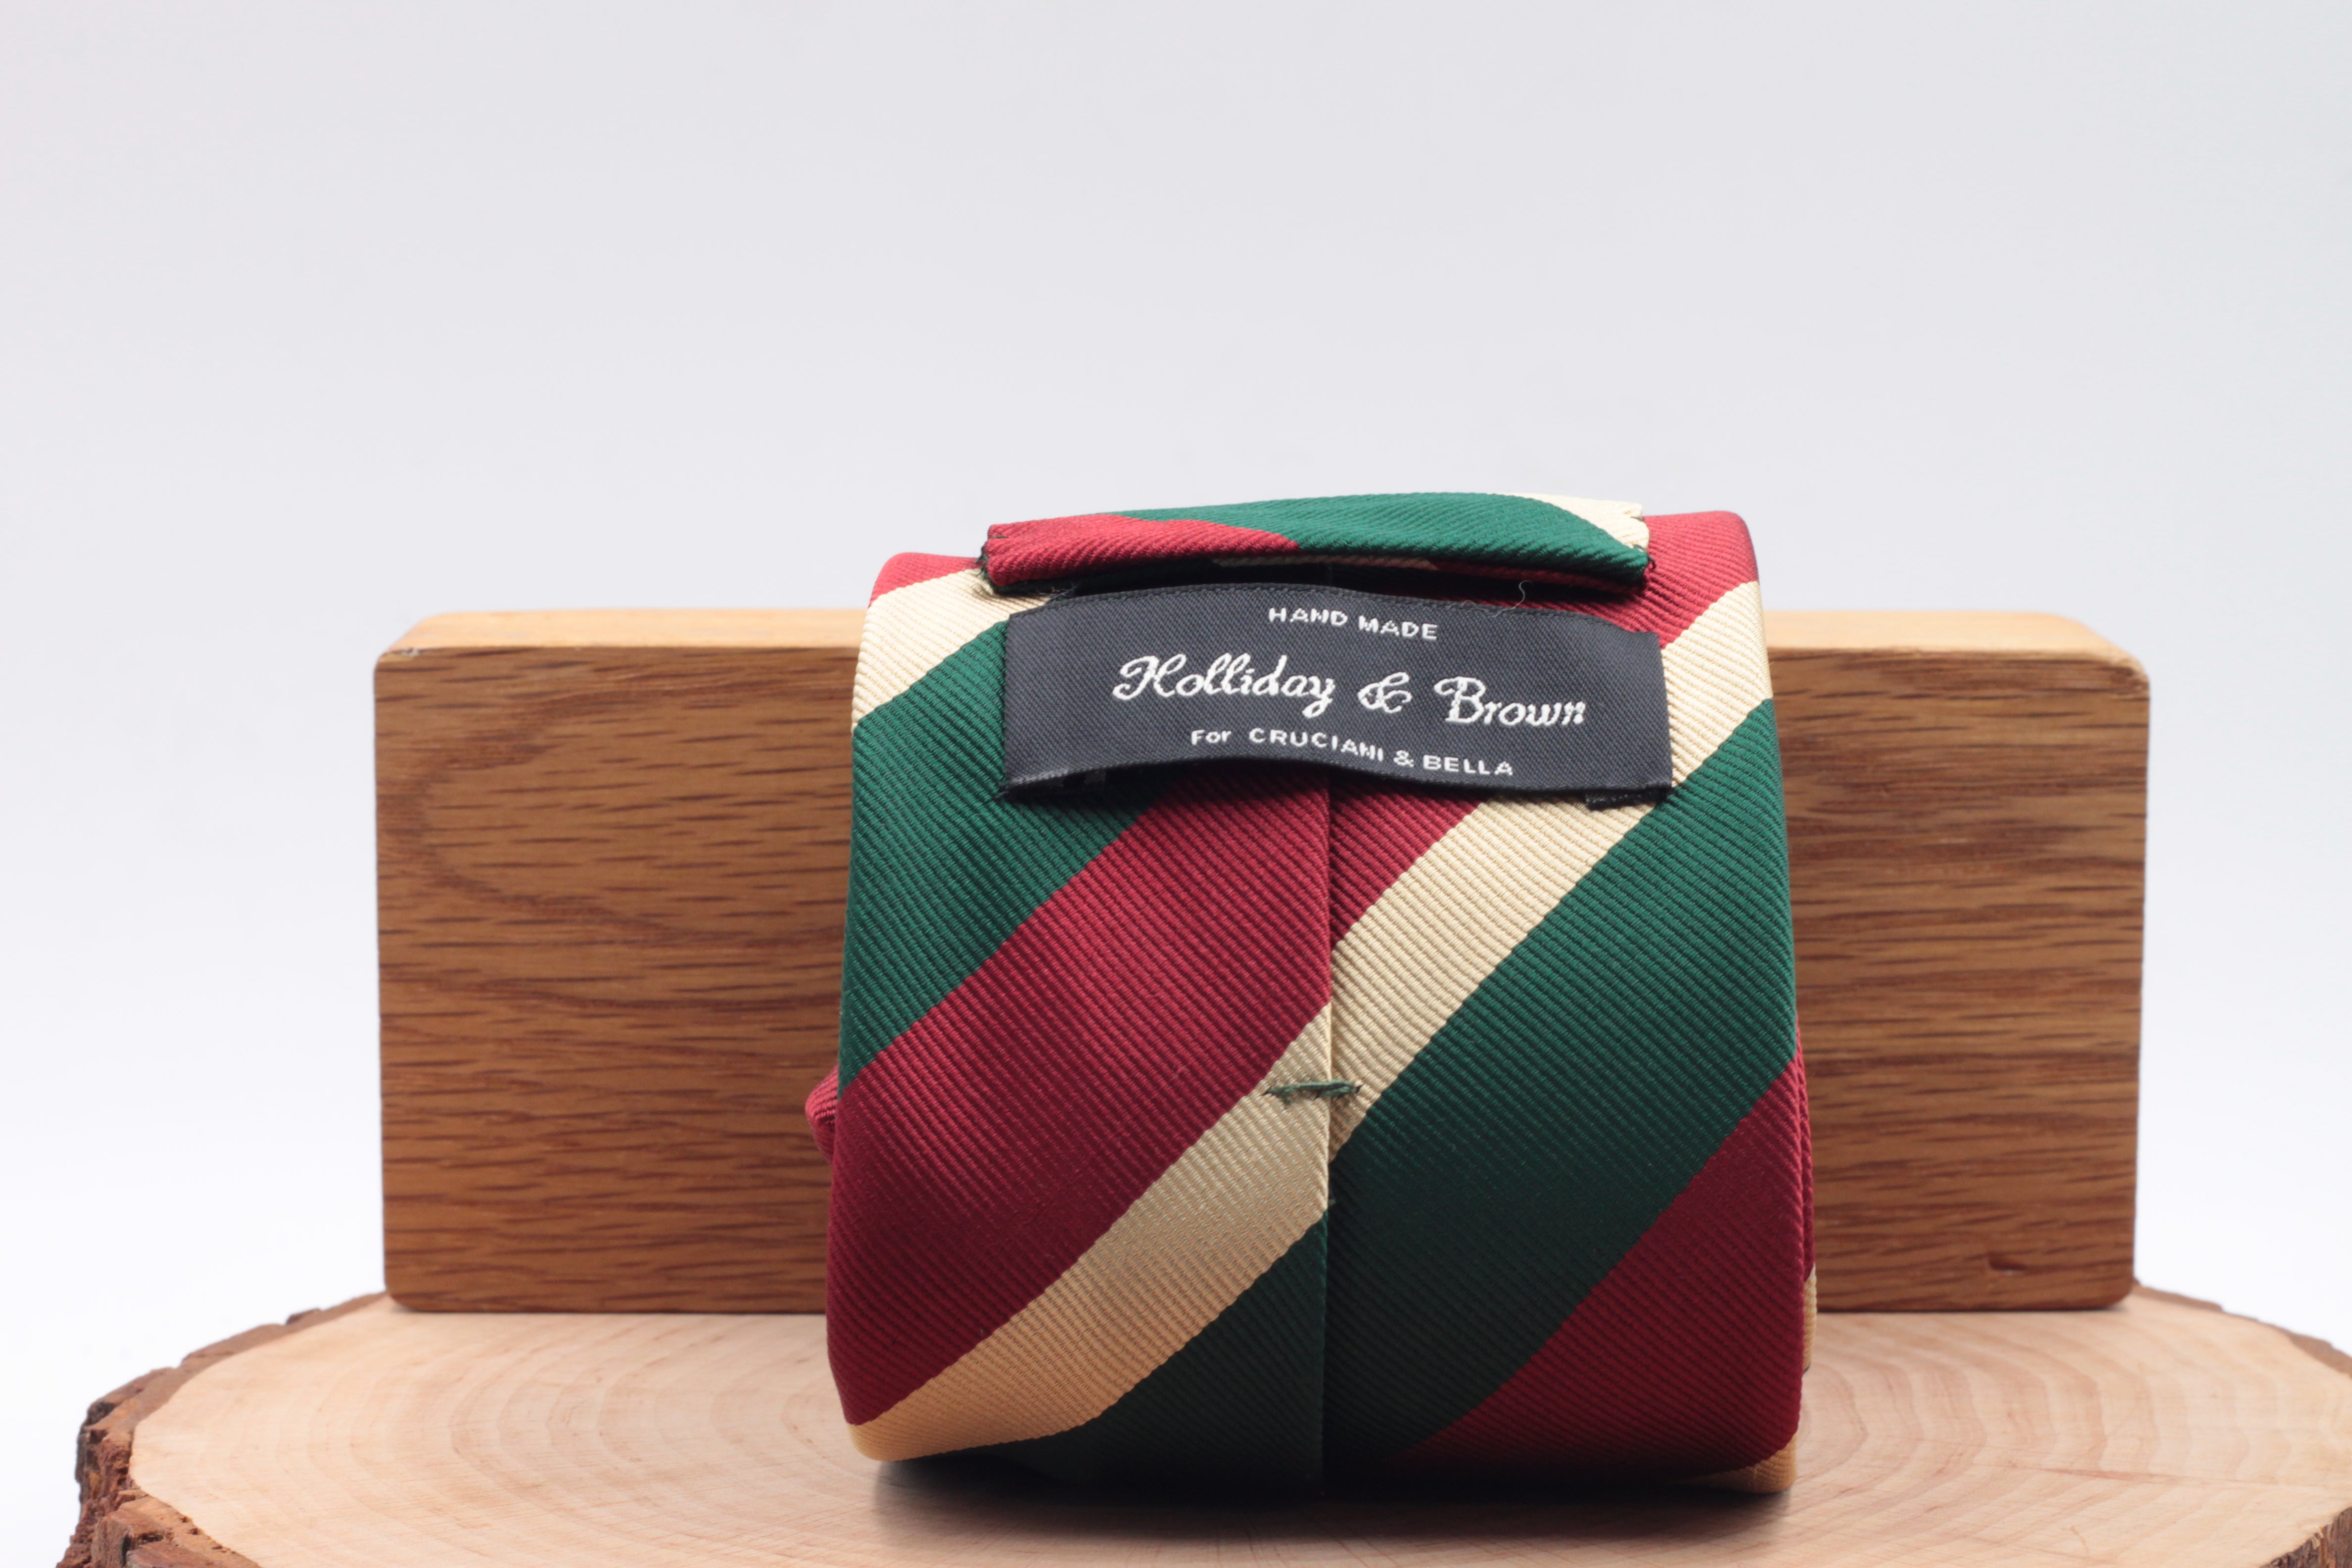 Holliday & Brown for Cruciani & Bella 100% Silk Jacquard  Regimental "5th Royal Inniskilling Dragoon Guards" Red, Green and Beige stripe tie Handmade in Italy 8 cm x 150 cm